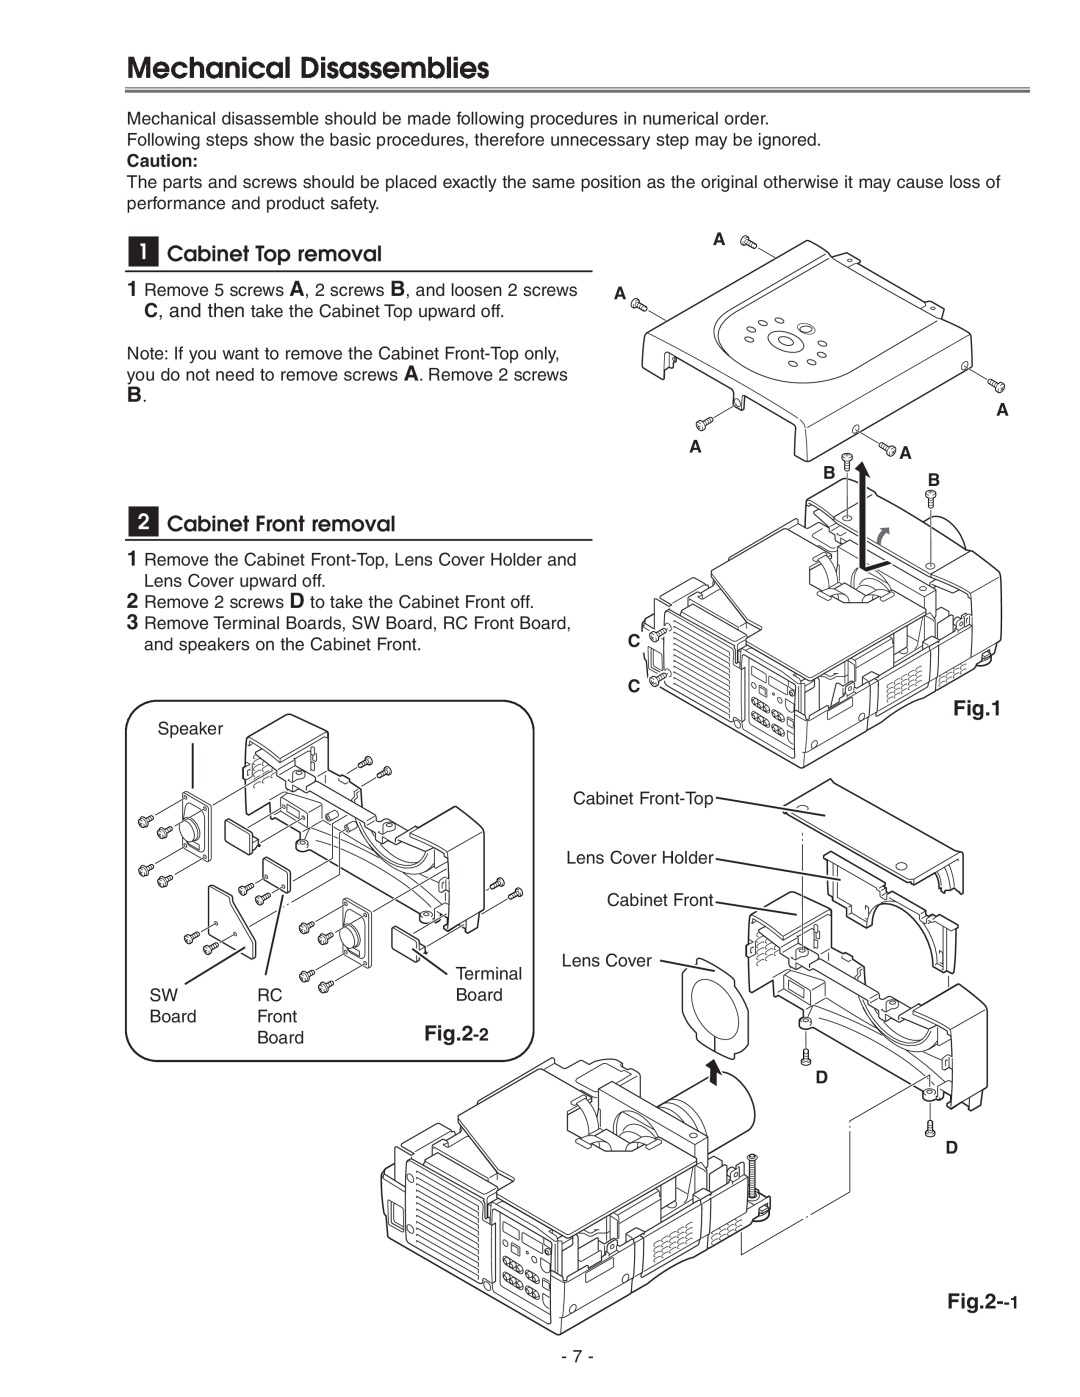 Eiki LC-X71 LC-X71L service manual Mechanical Disassemblies, Cabinet Top removal, Cabinet Front removal 